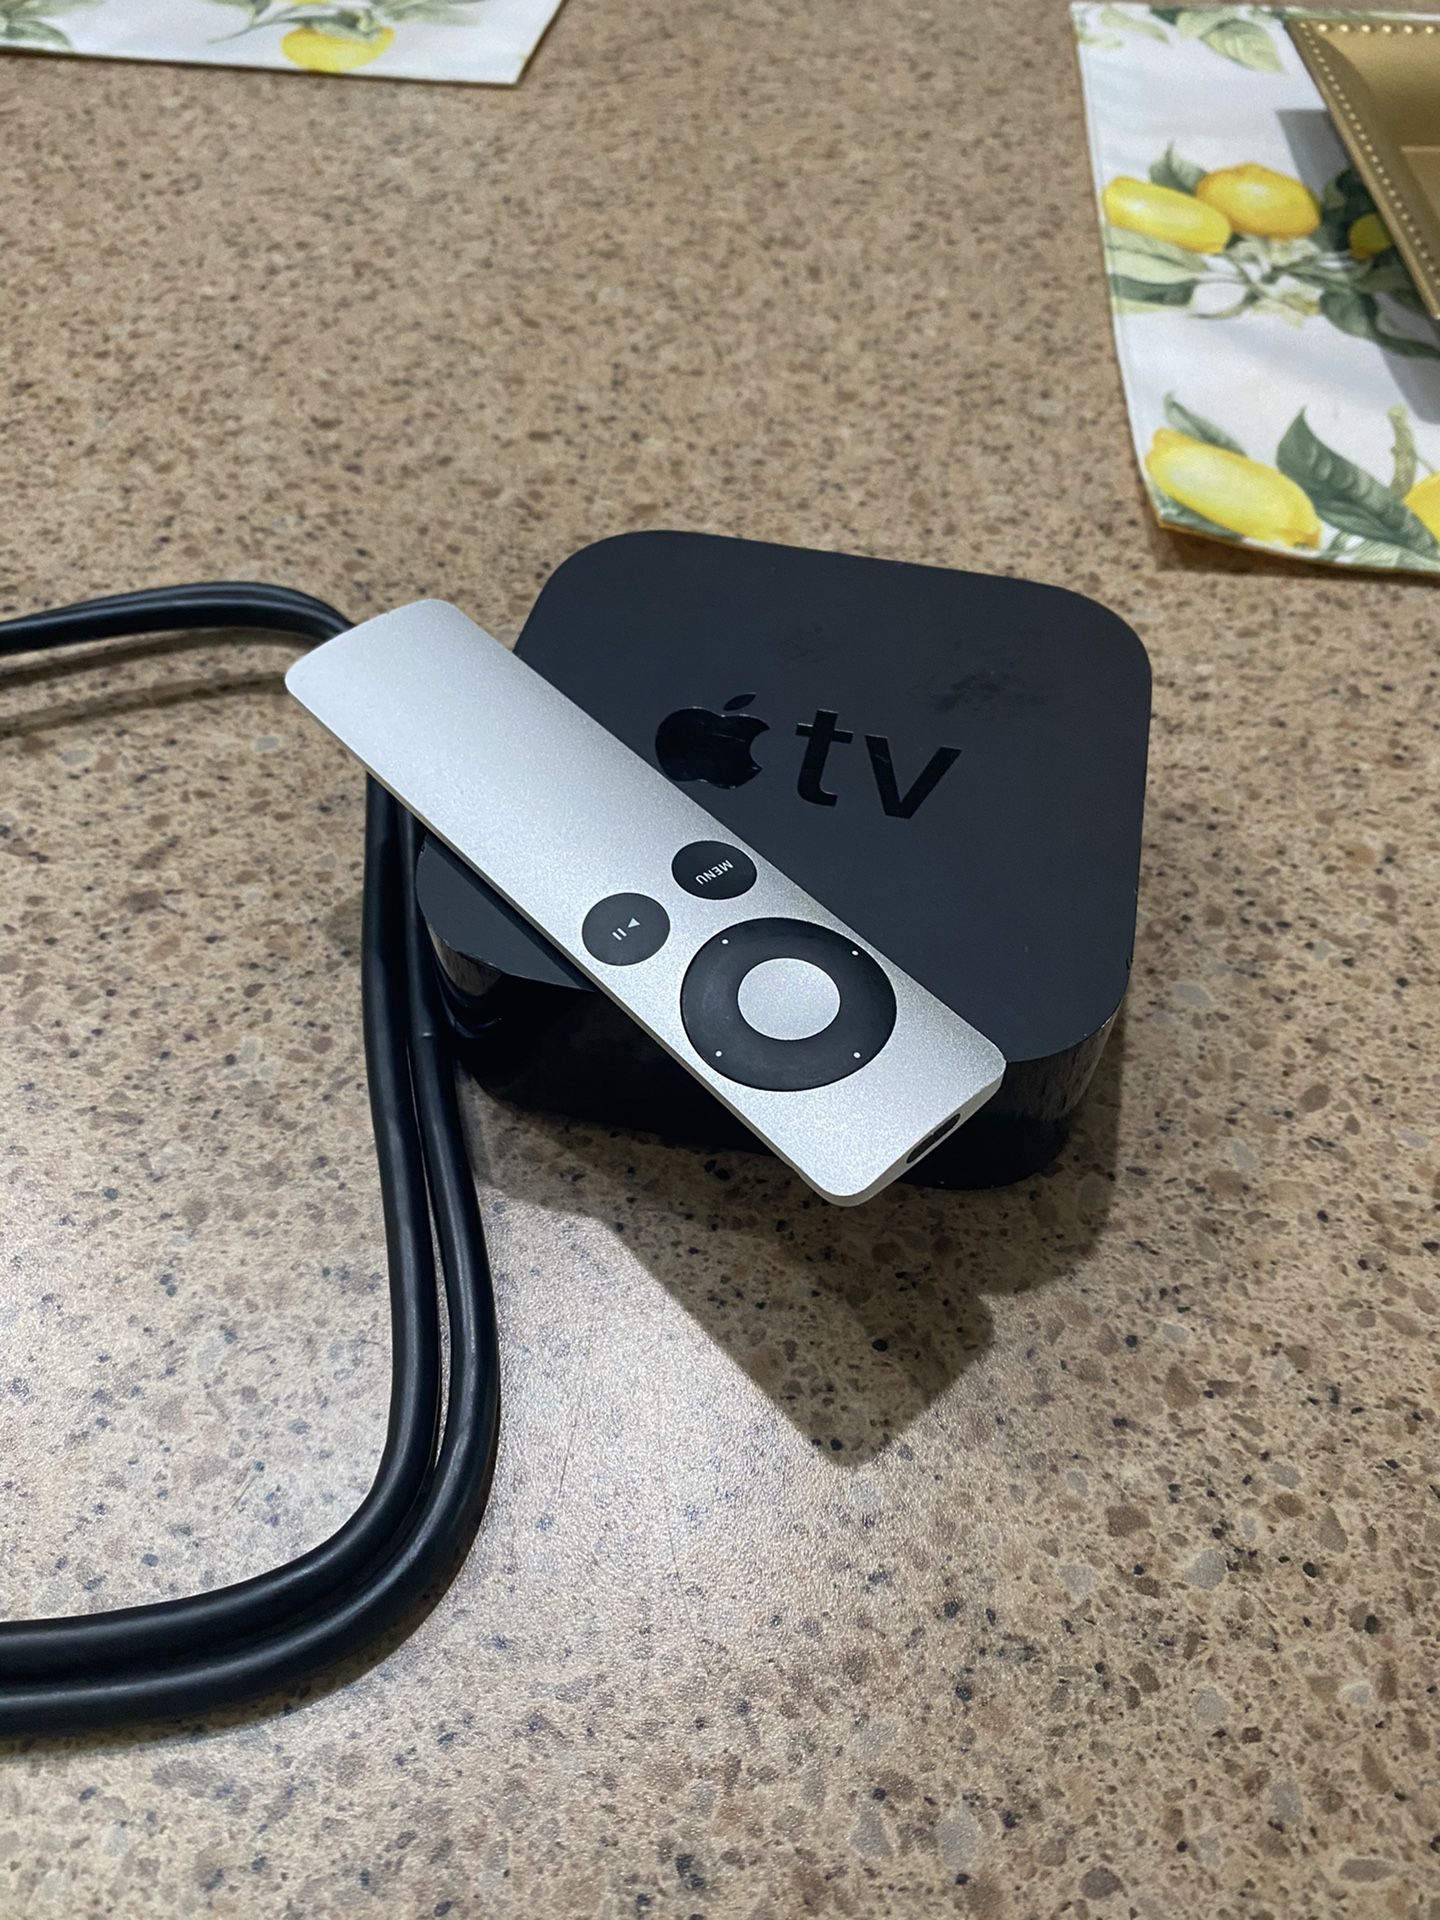 *APPLE TV 4K WORKS PERFECT! ONLY USED ONCE!